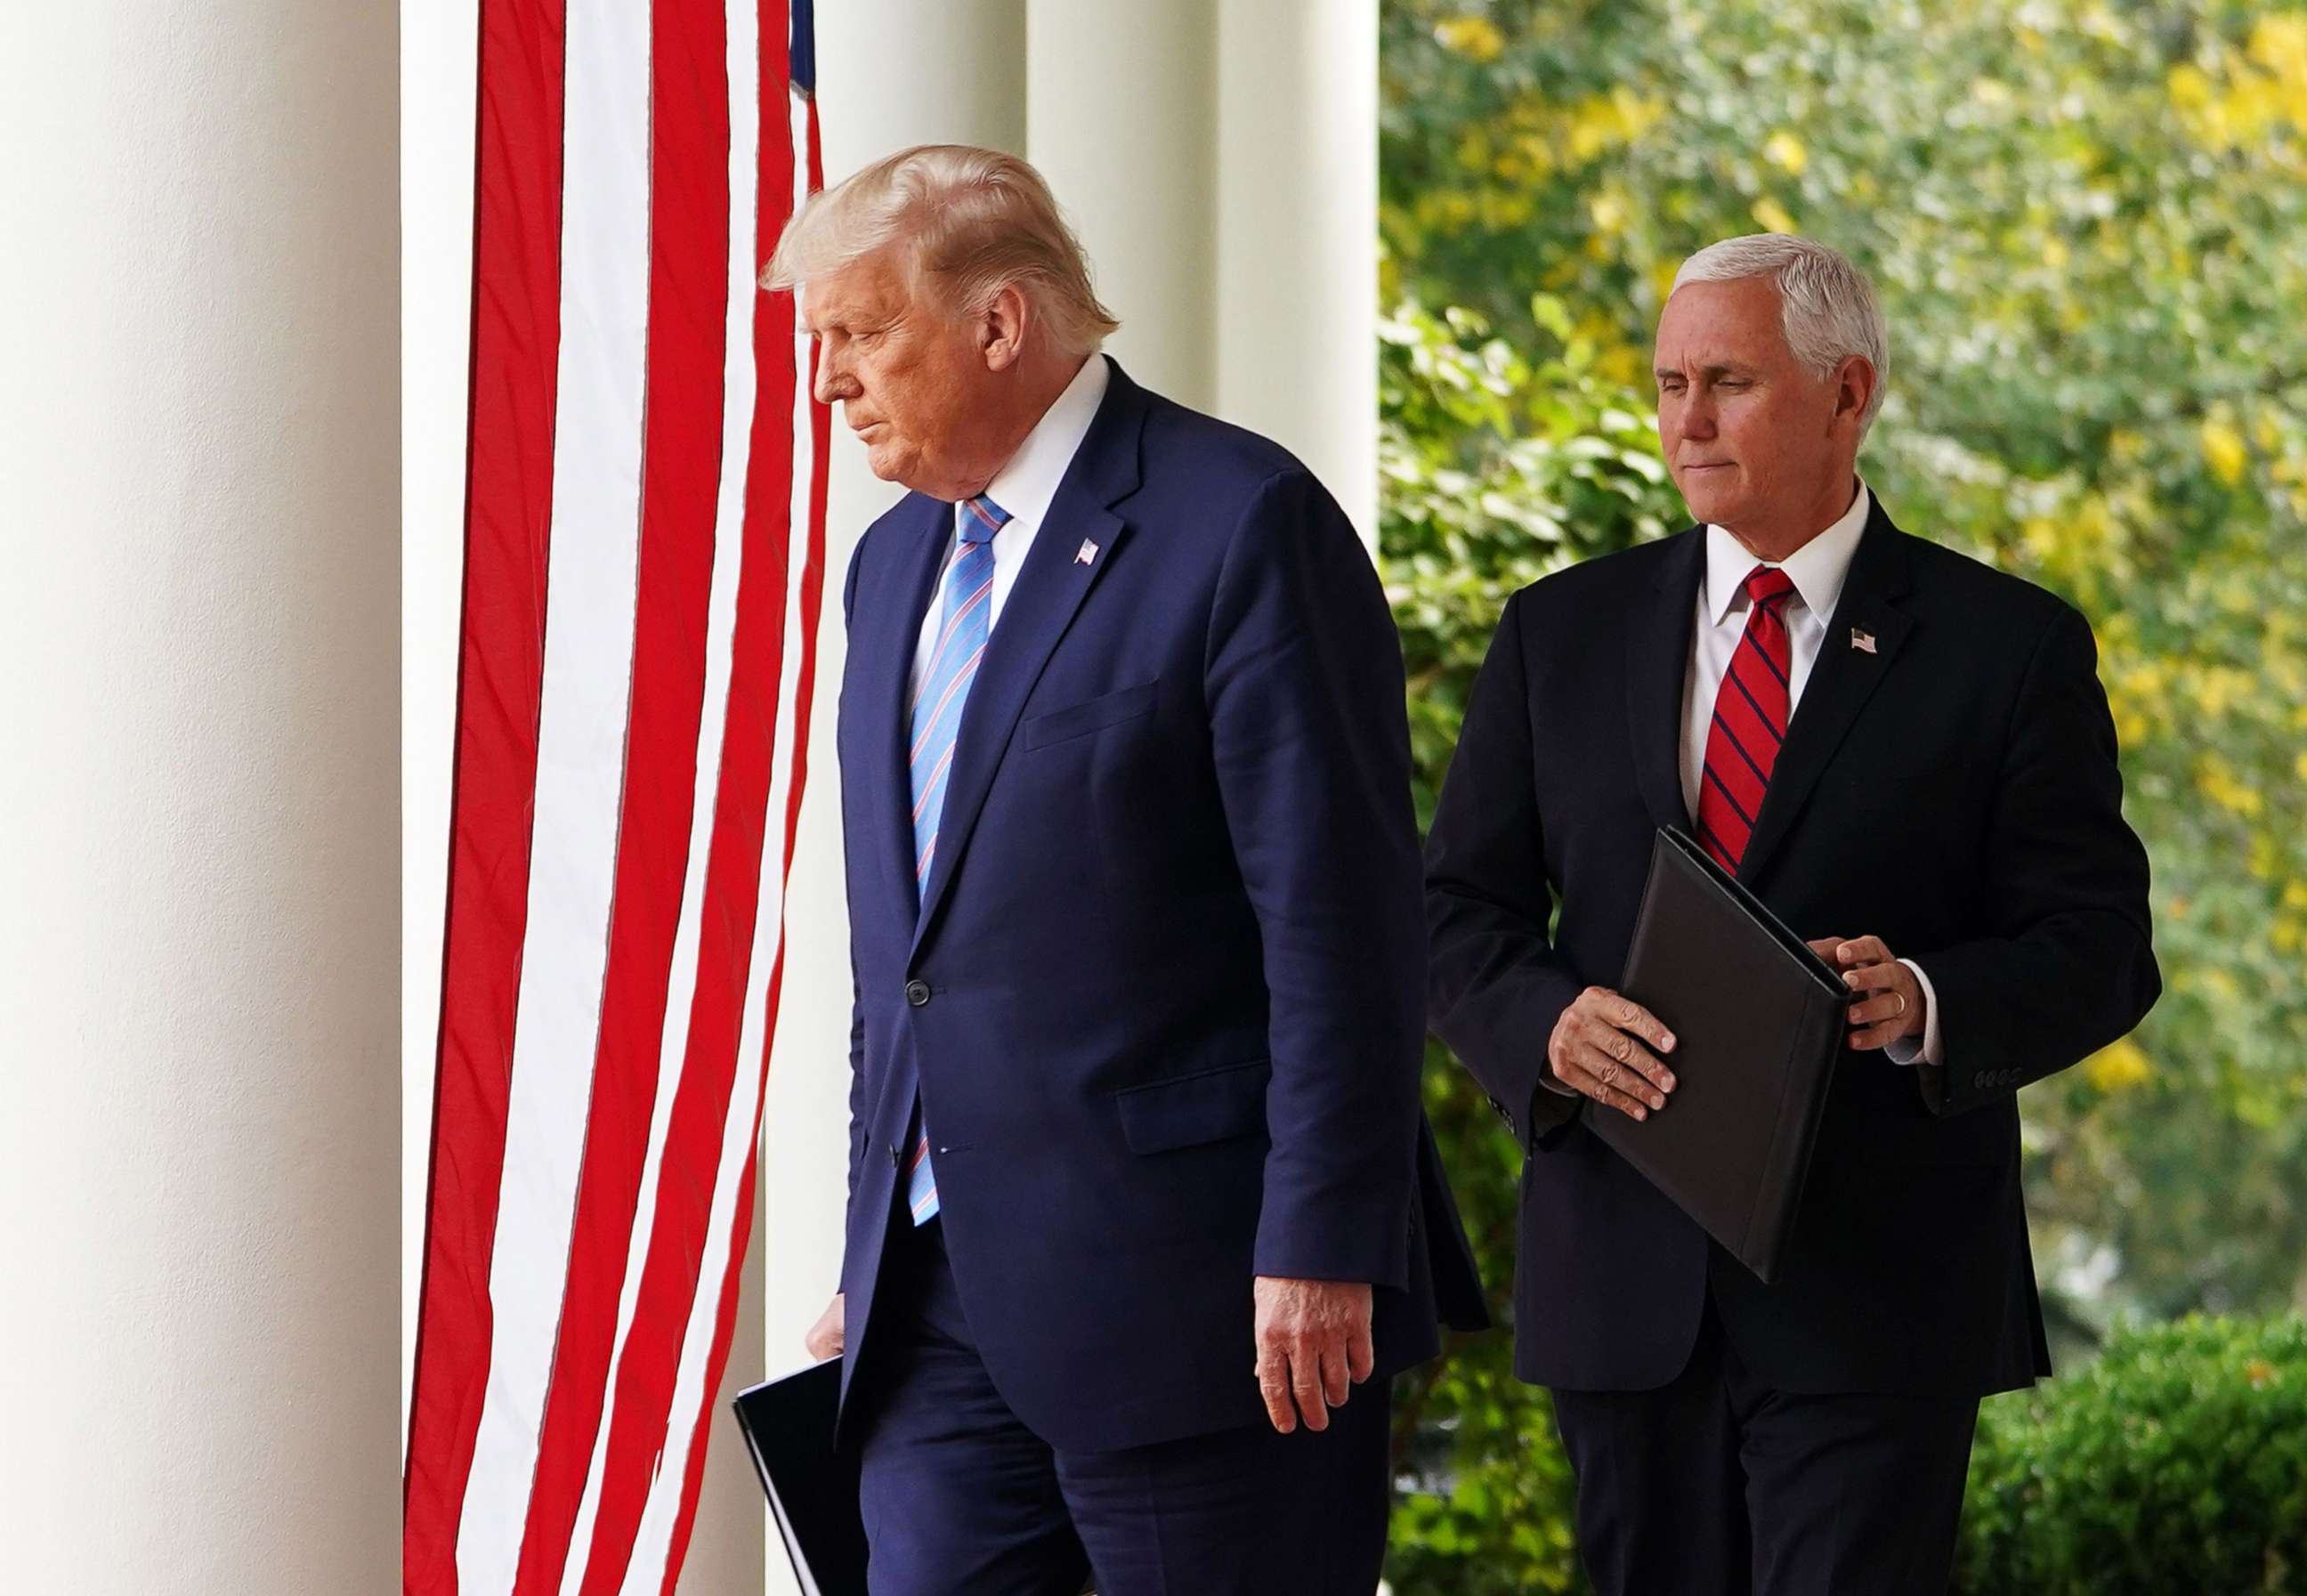 PHOTO:President Donald Trump and Vice President Mike Pence arrive in the Rose Garden to speak on Covid-19 testing at the White House in Washington, D.C., Sept. 28, 2020.